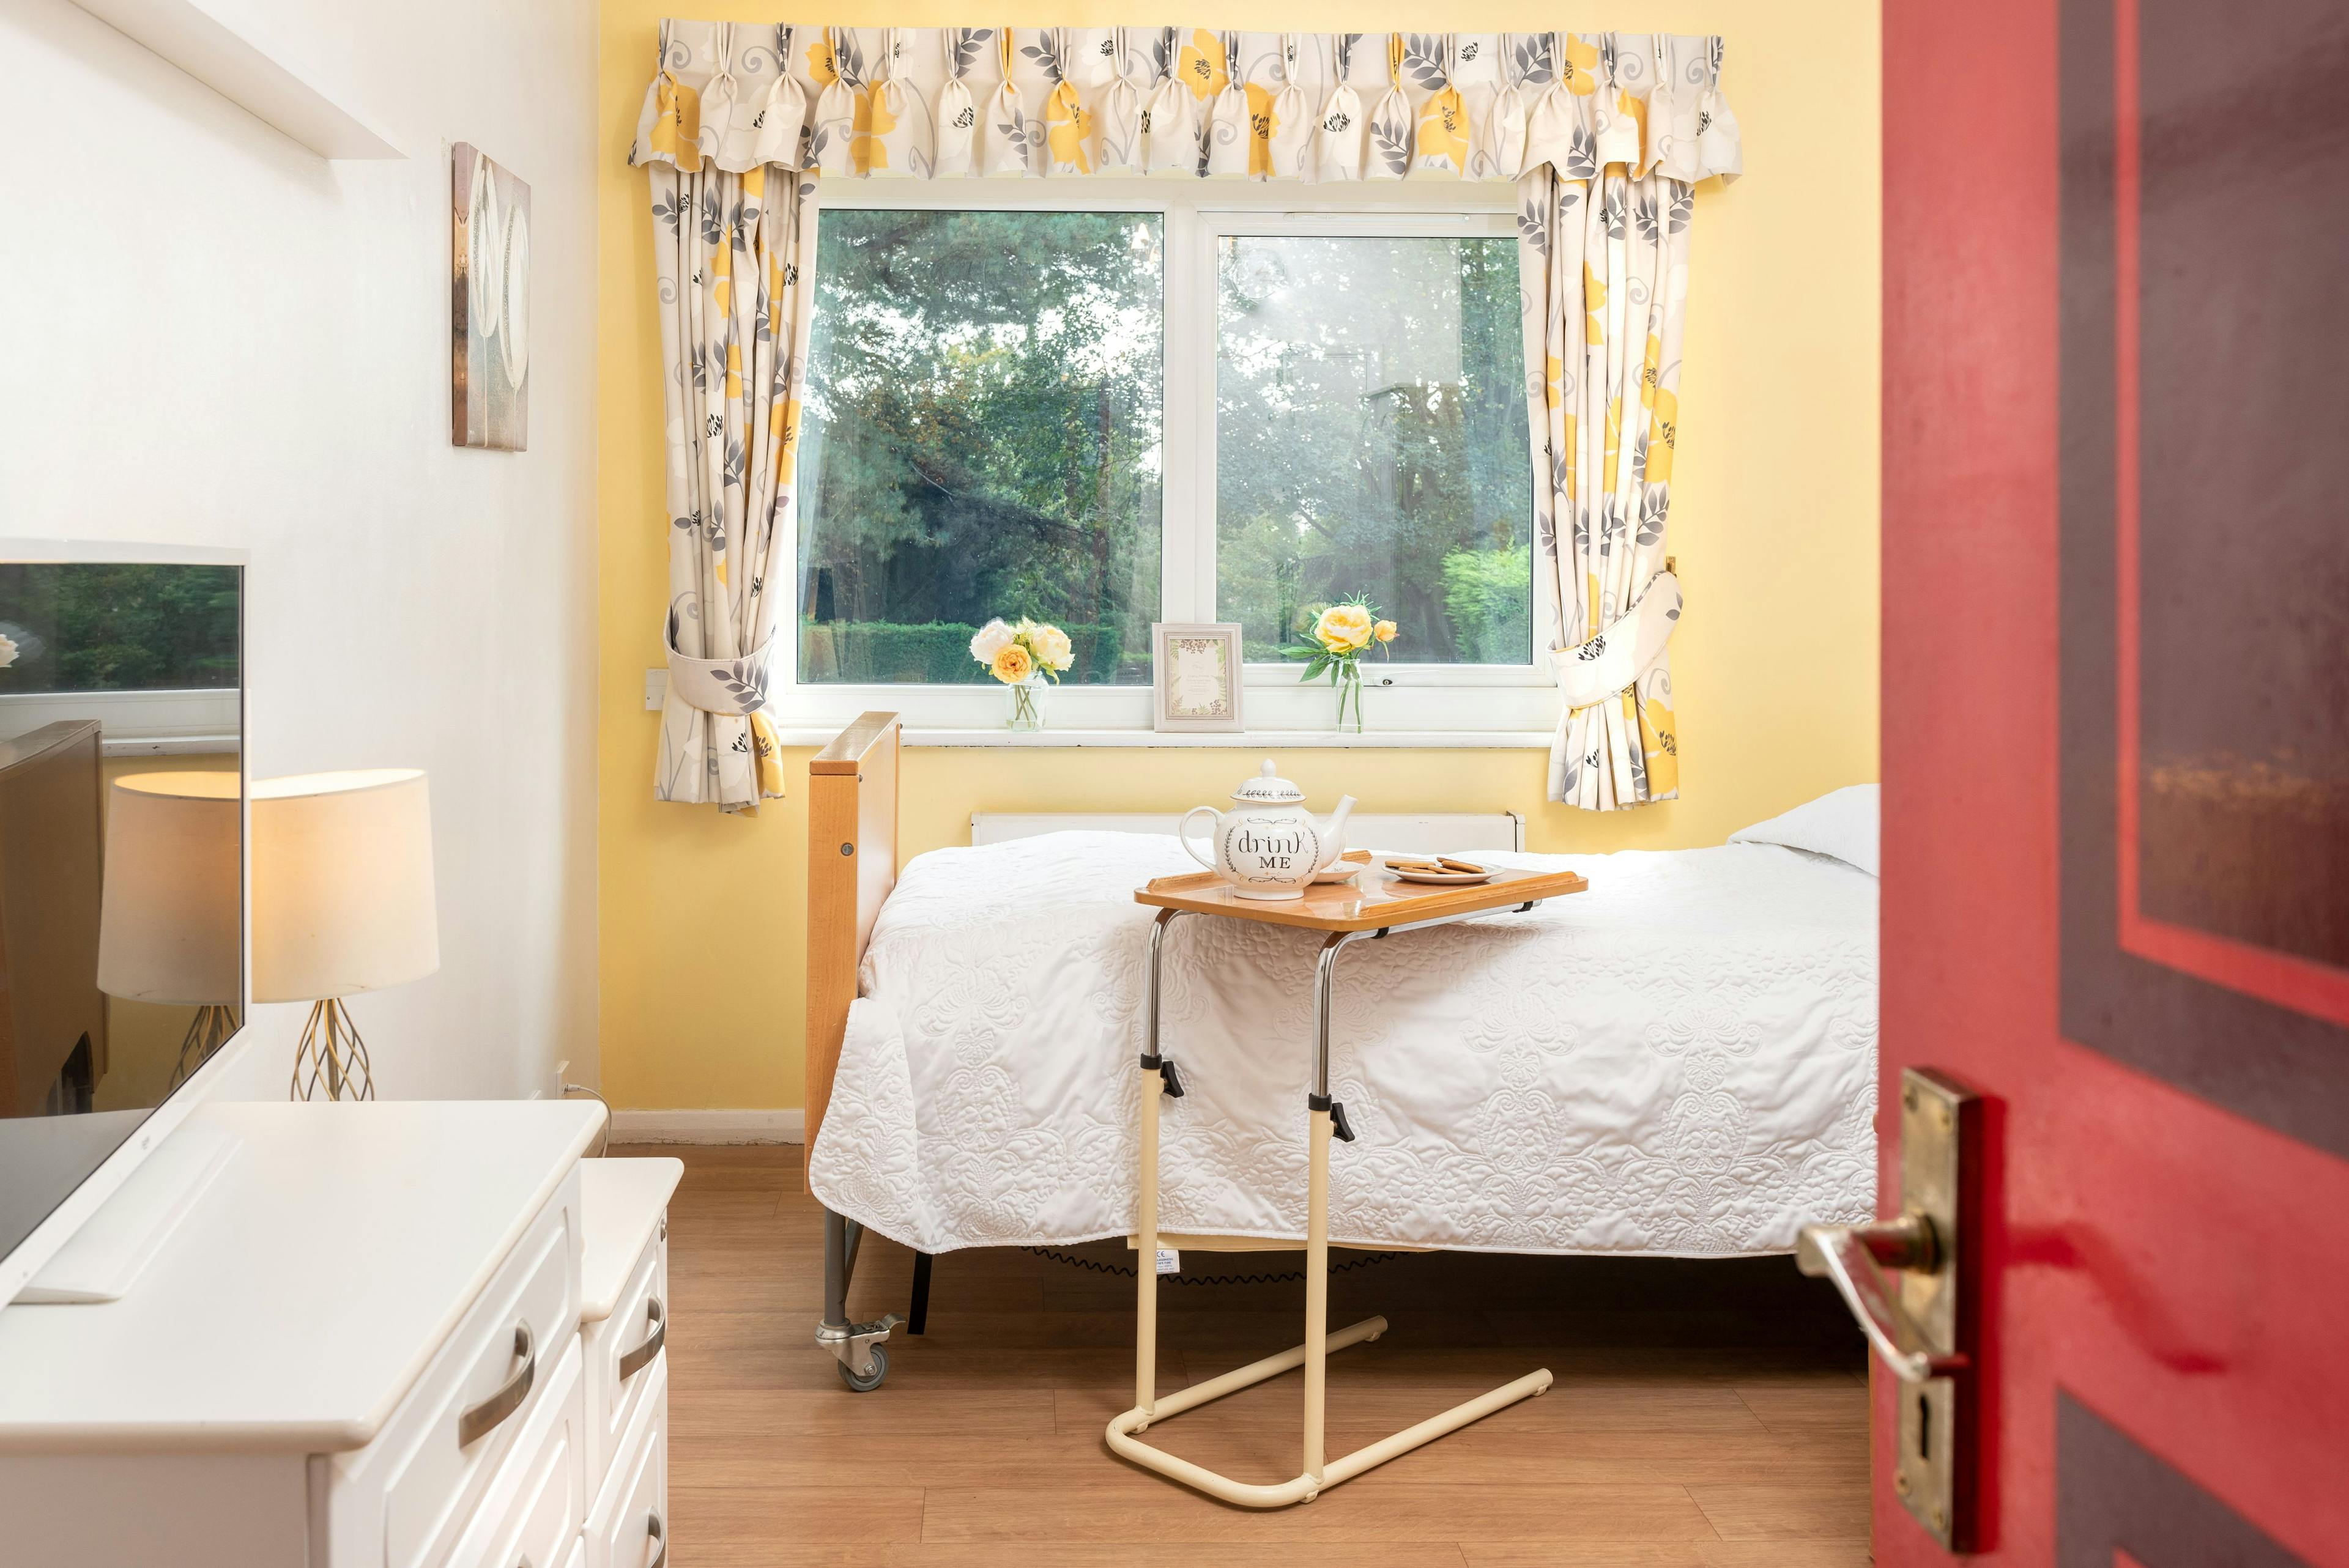 Bedroom of The Poplars care home in Maidstone, Kent